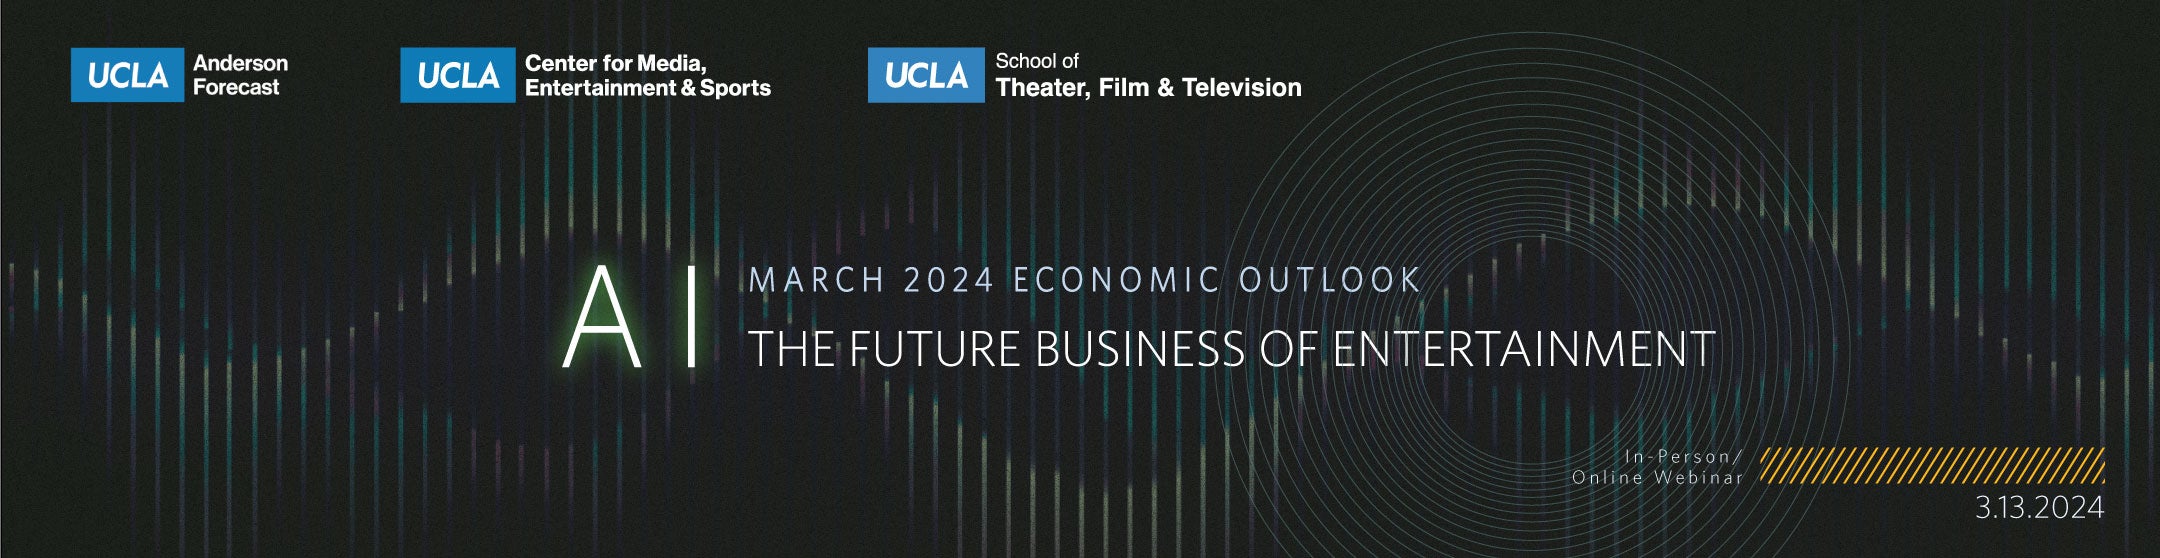 UCLA Anderson Forecast - March 2024 Economic Outlook